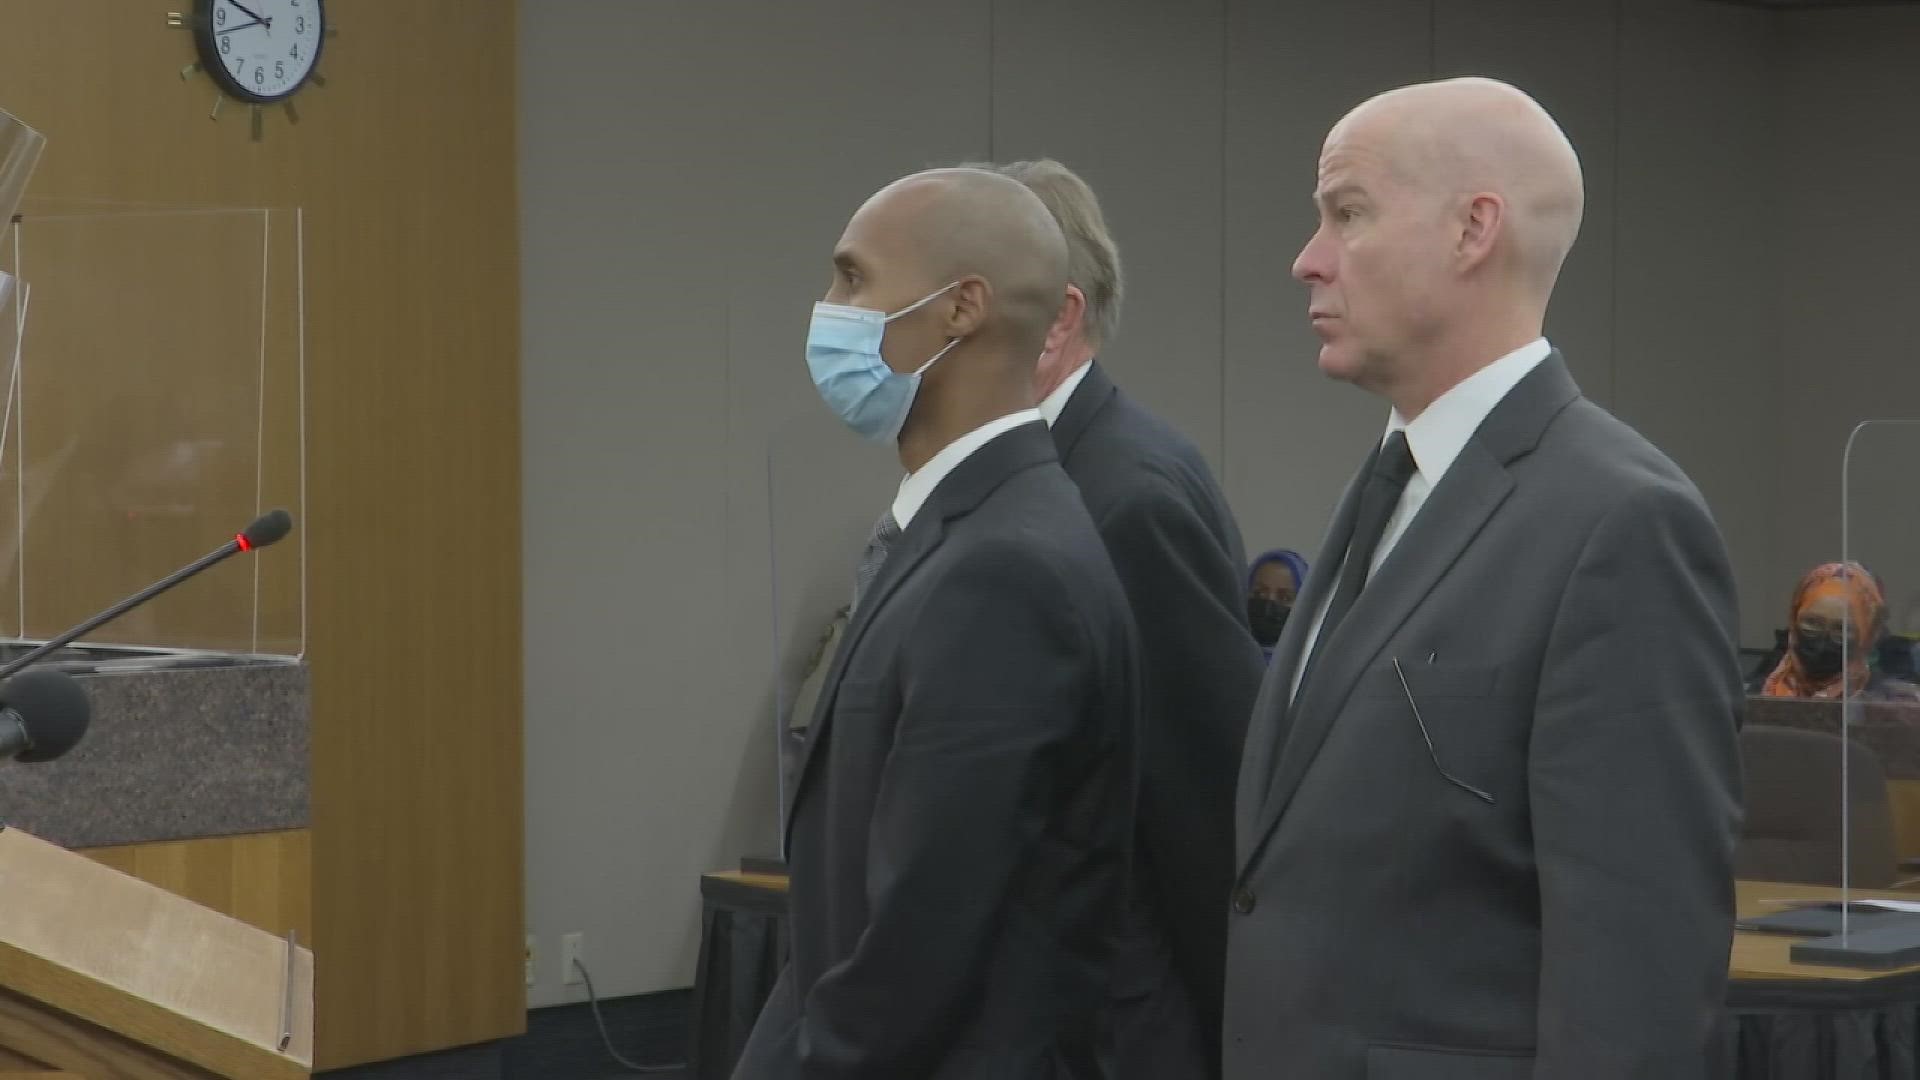 Judge Kathryn Quaintance listened to victim statements and attorney arguments, then sentenced Mohamed Noor to 57 months in prison.